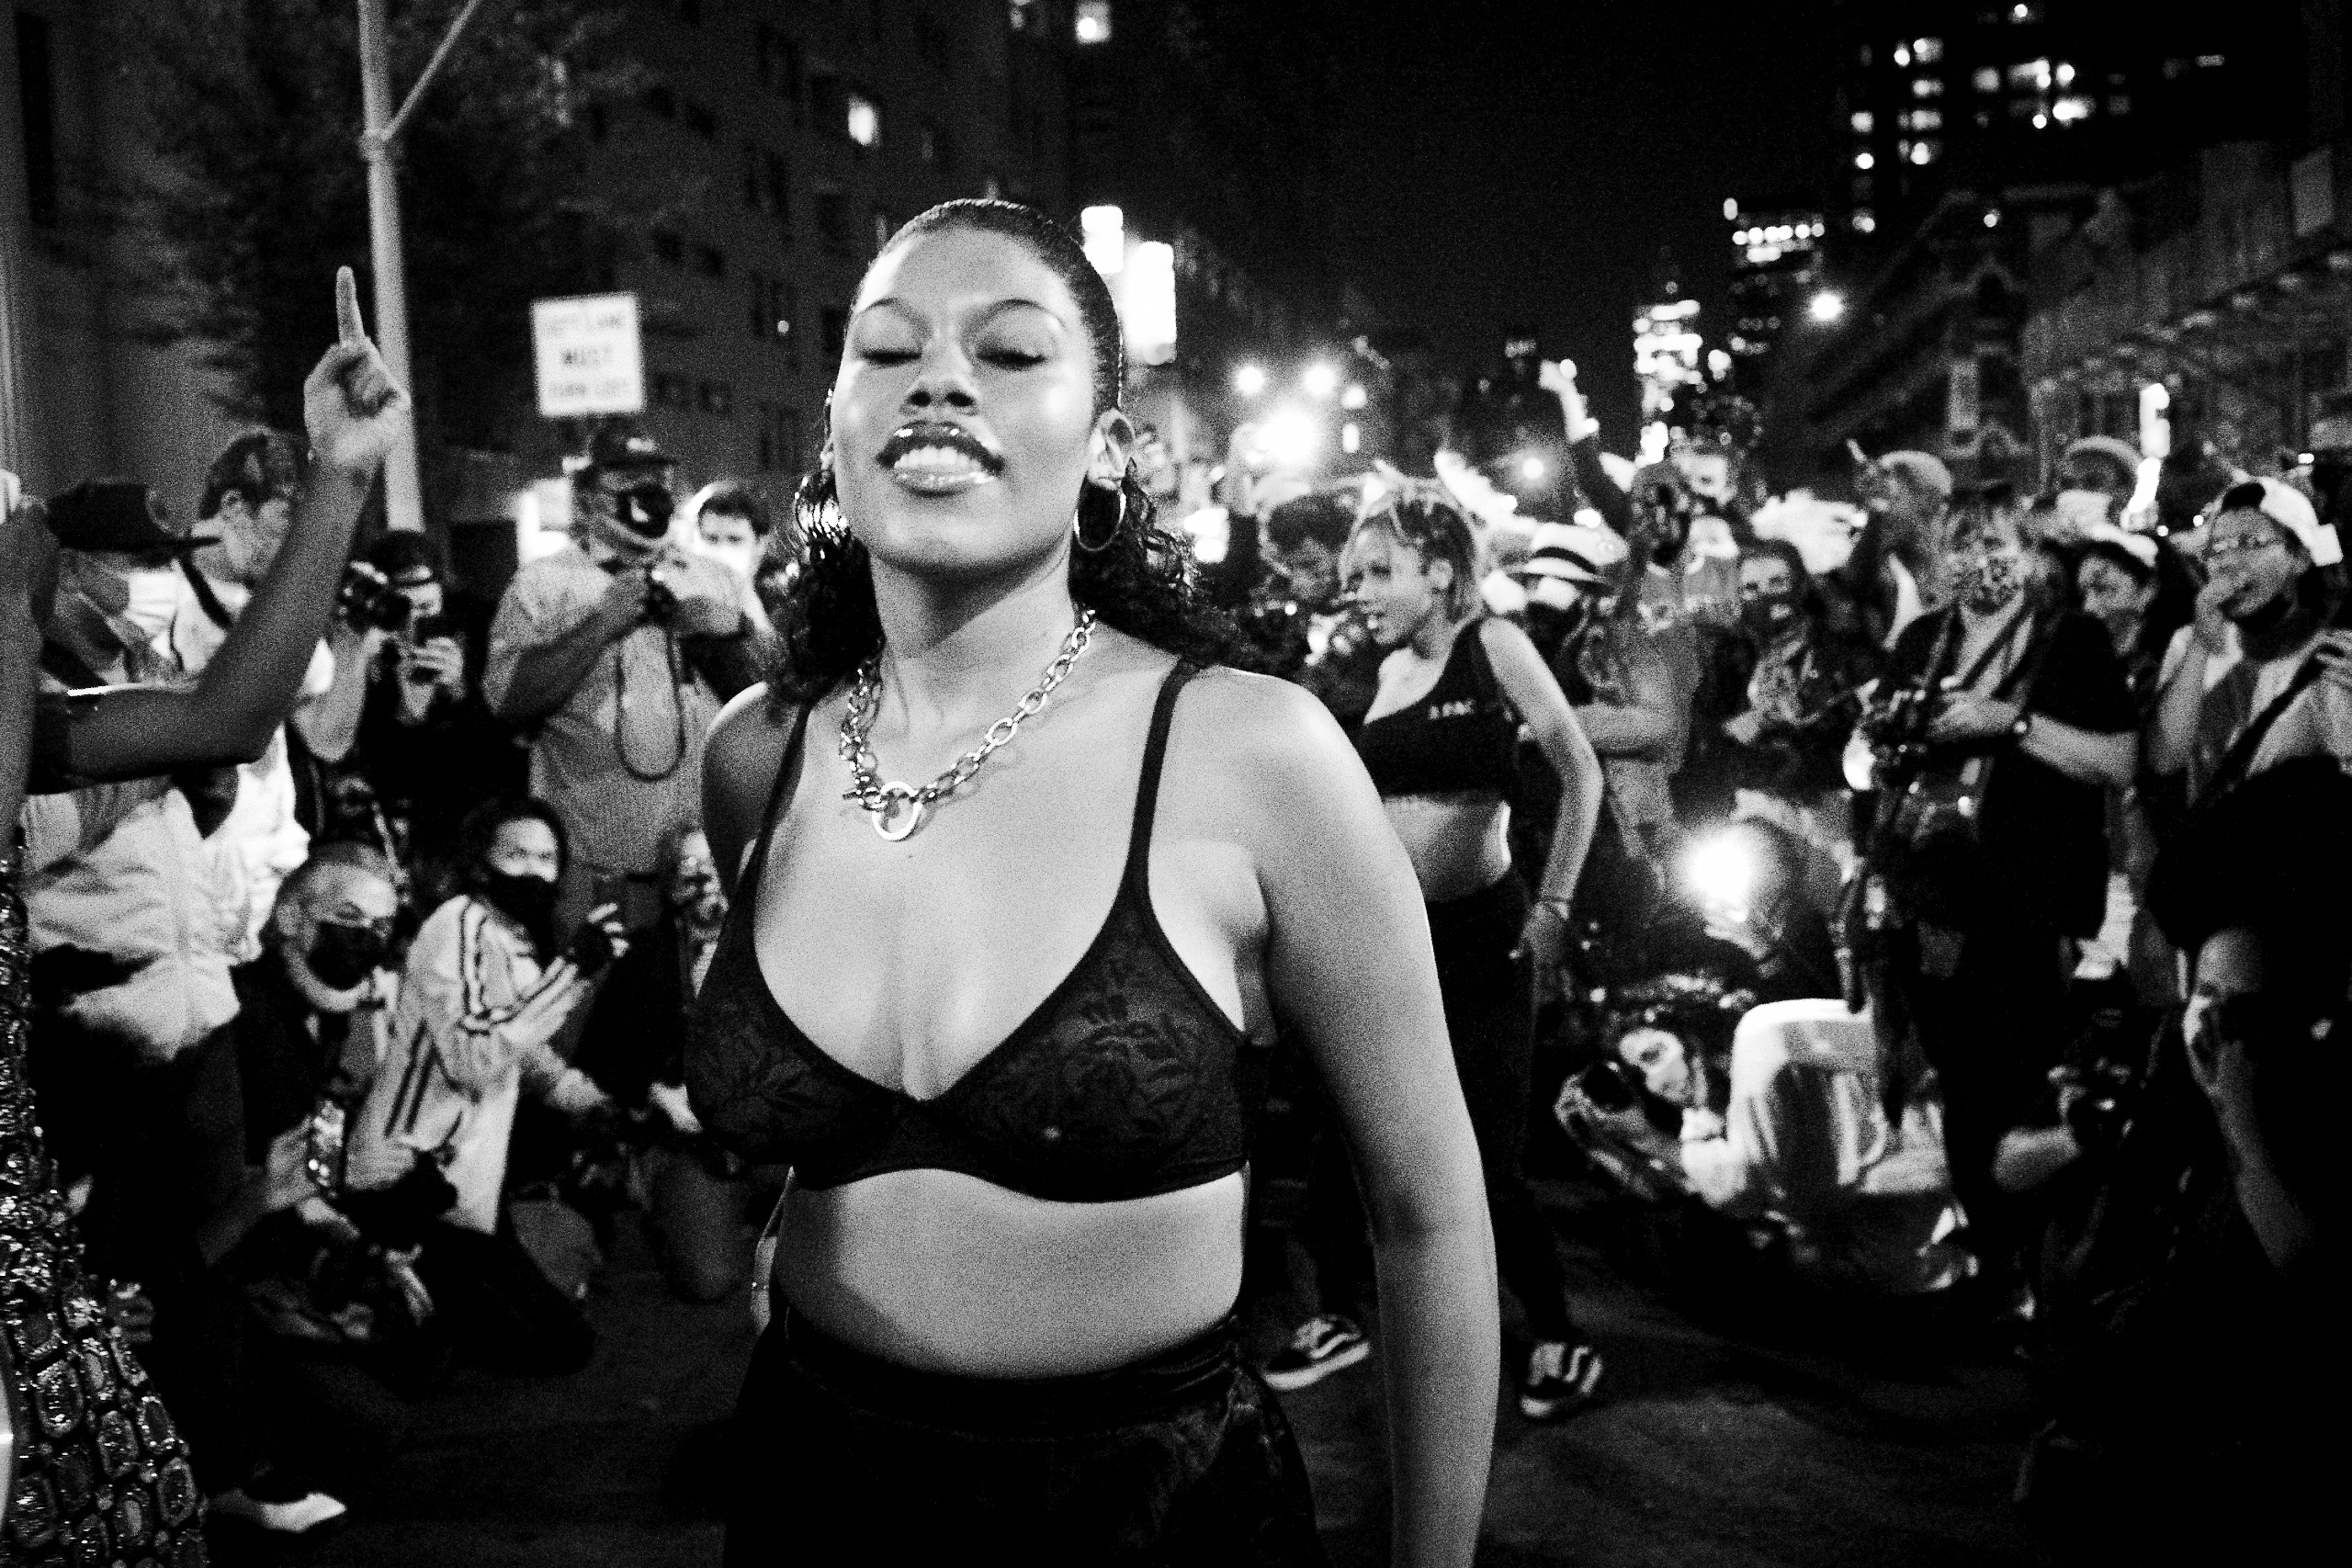 20201015-1_NYC_Protests_Stonewall_02_0556_SeanWaltrous